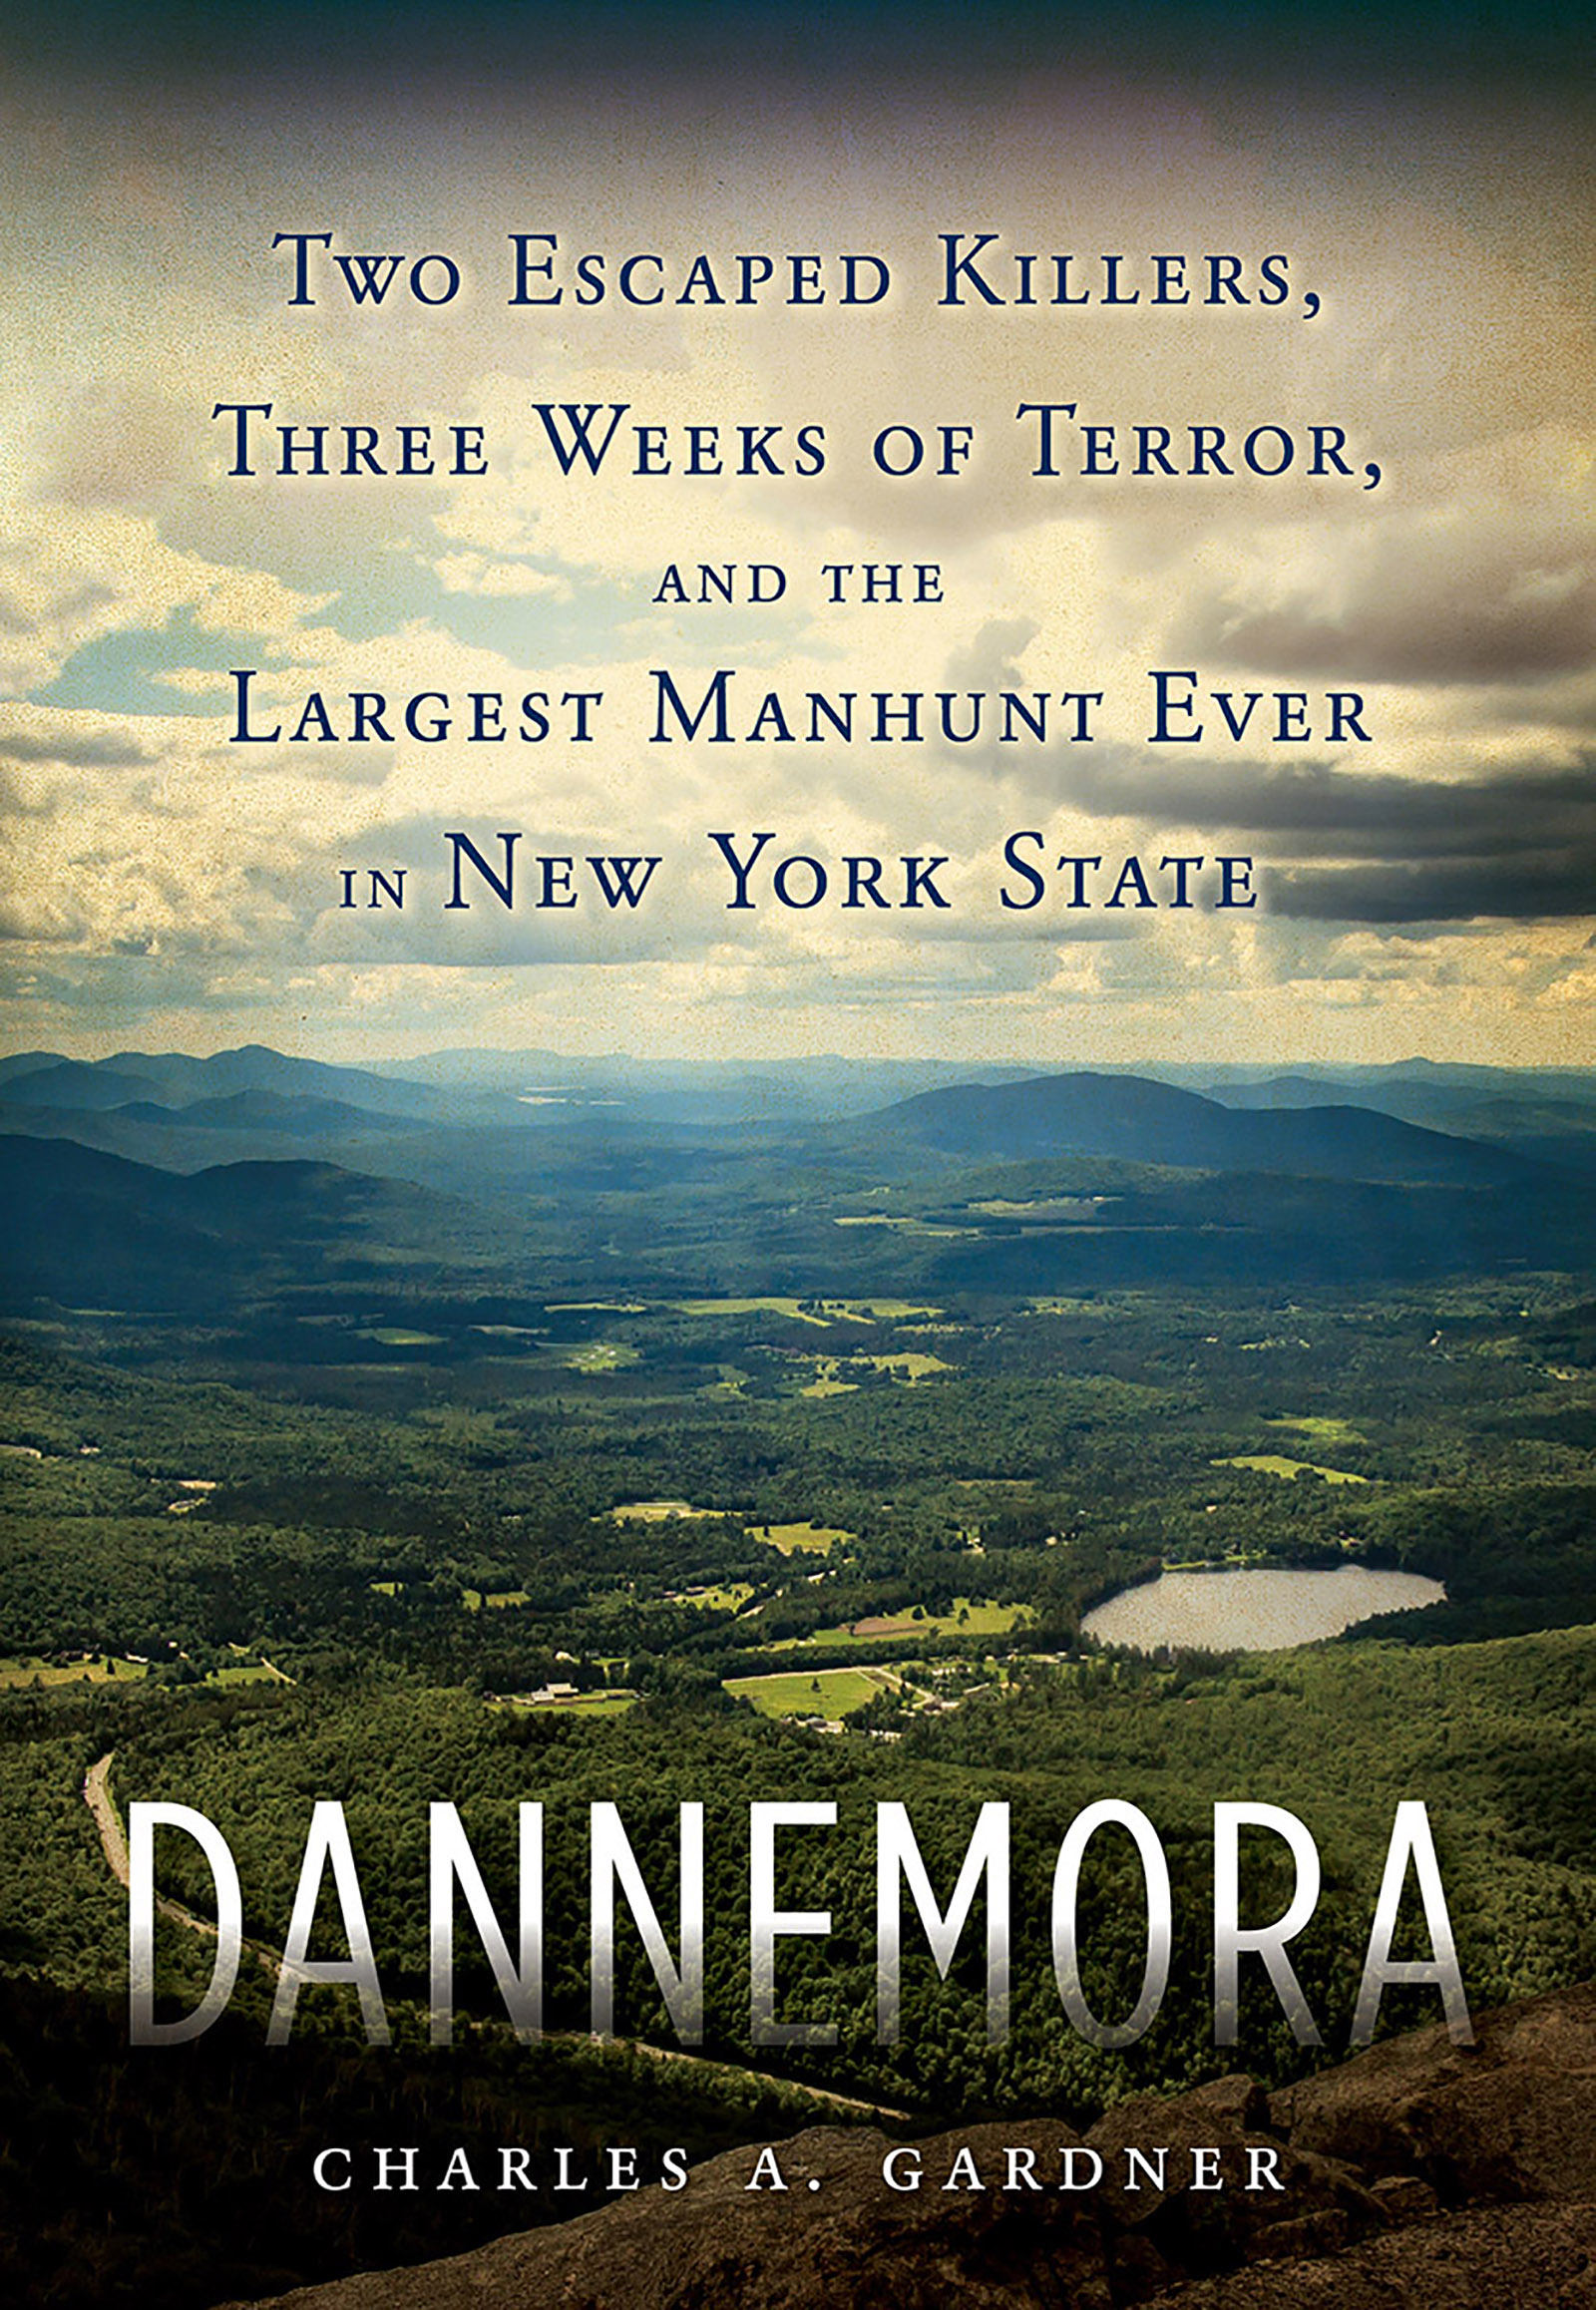 Dannemora two escaped killers, three weeks of terror, and the largest manhunt ever in New York State cover image